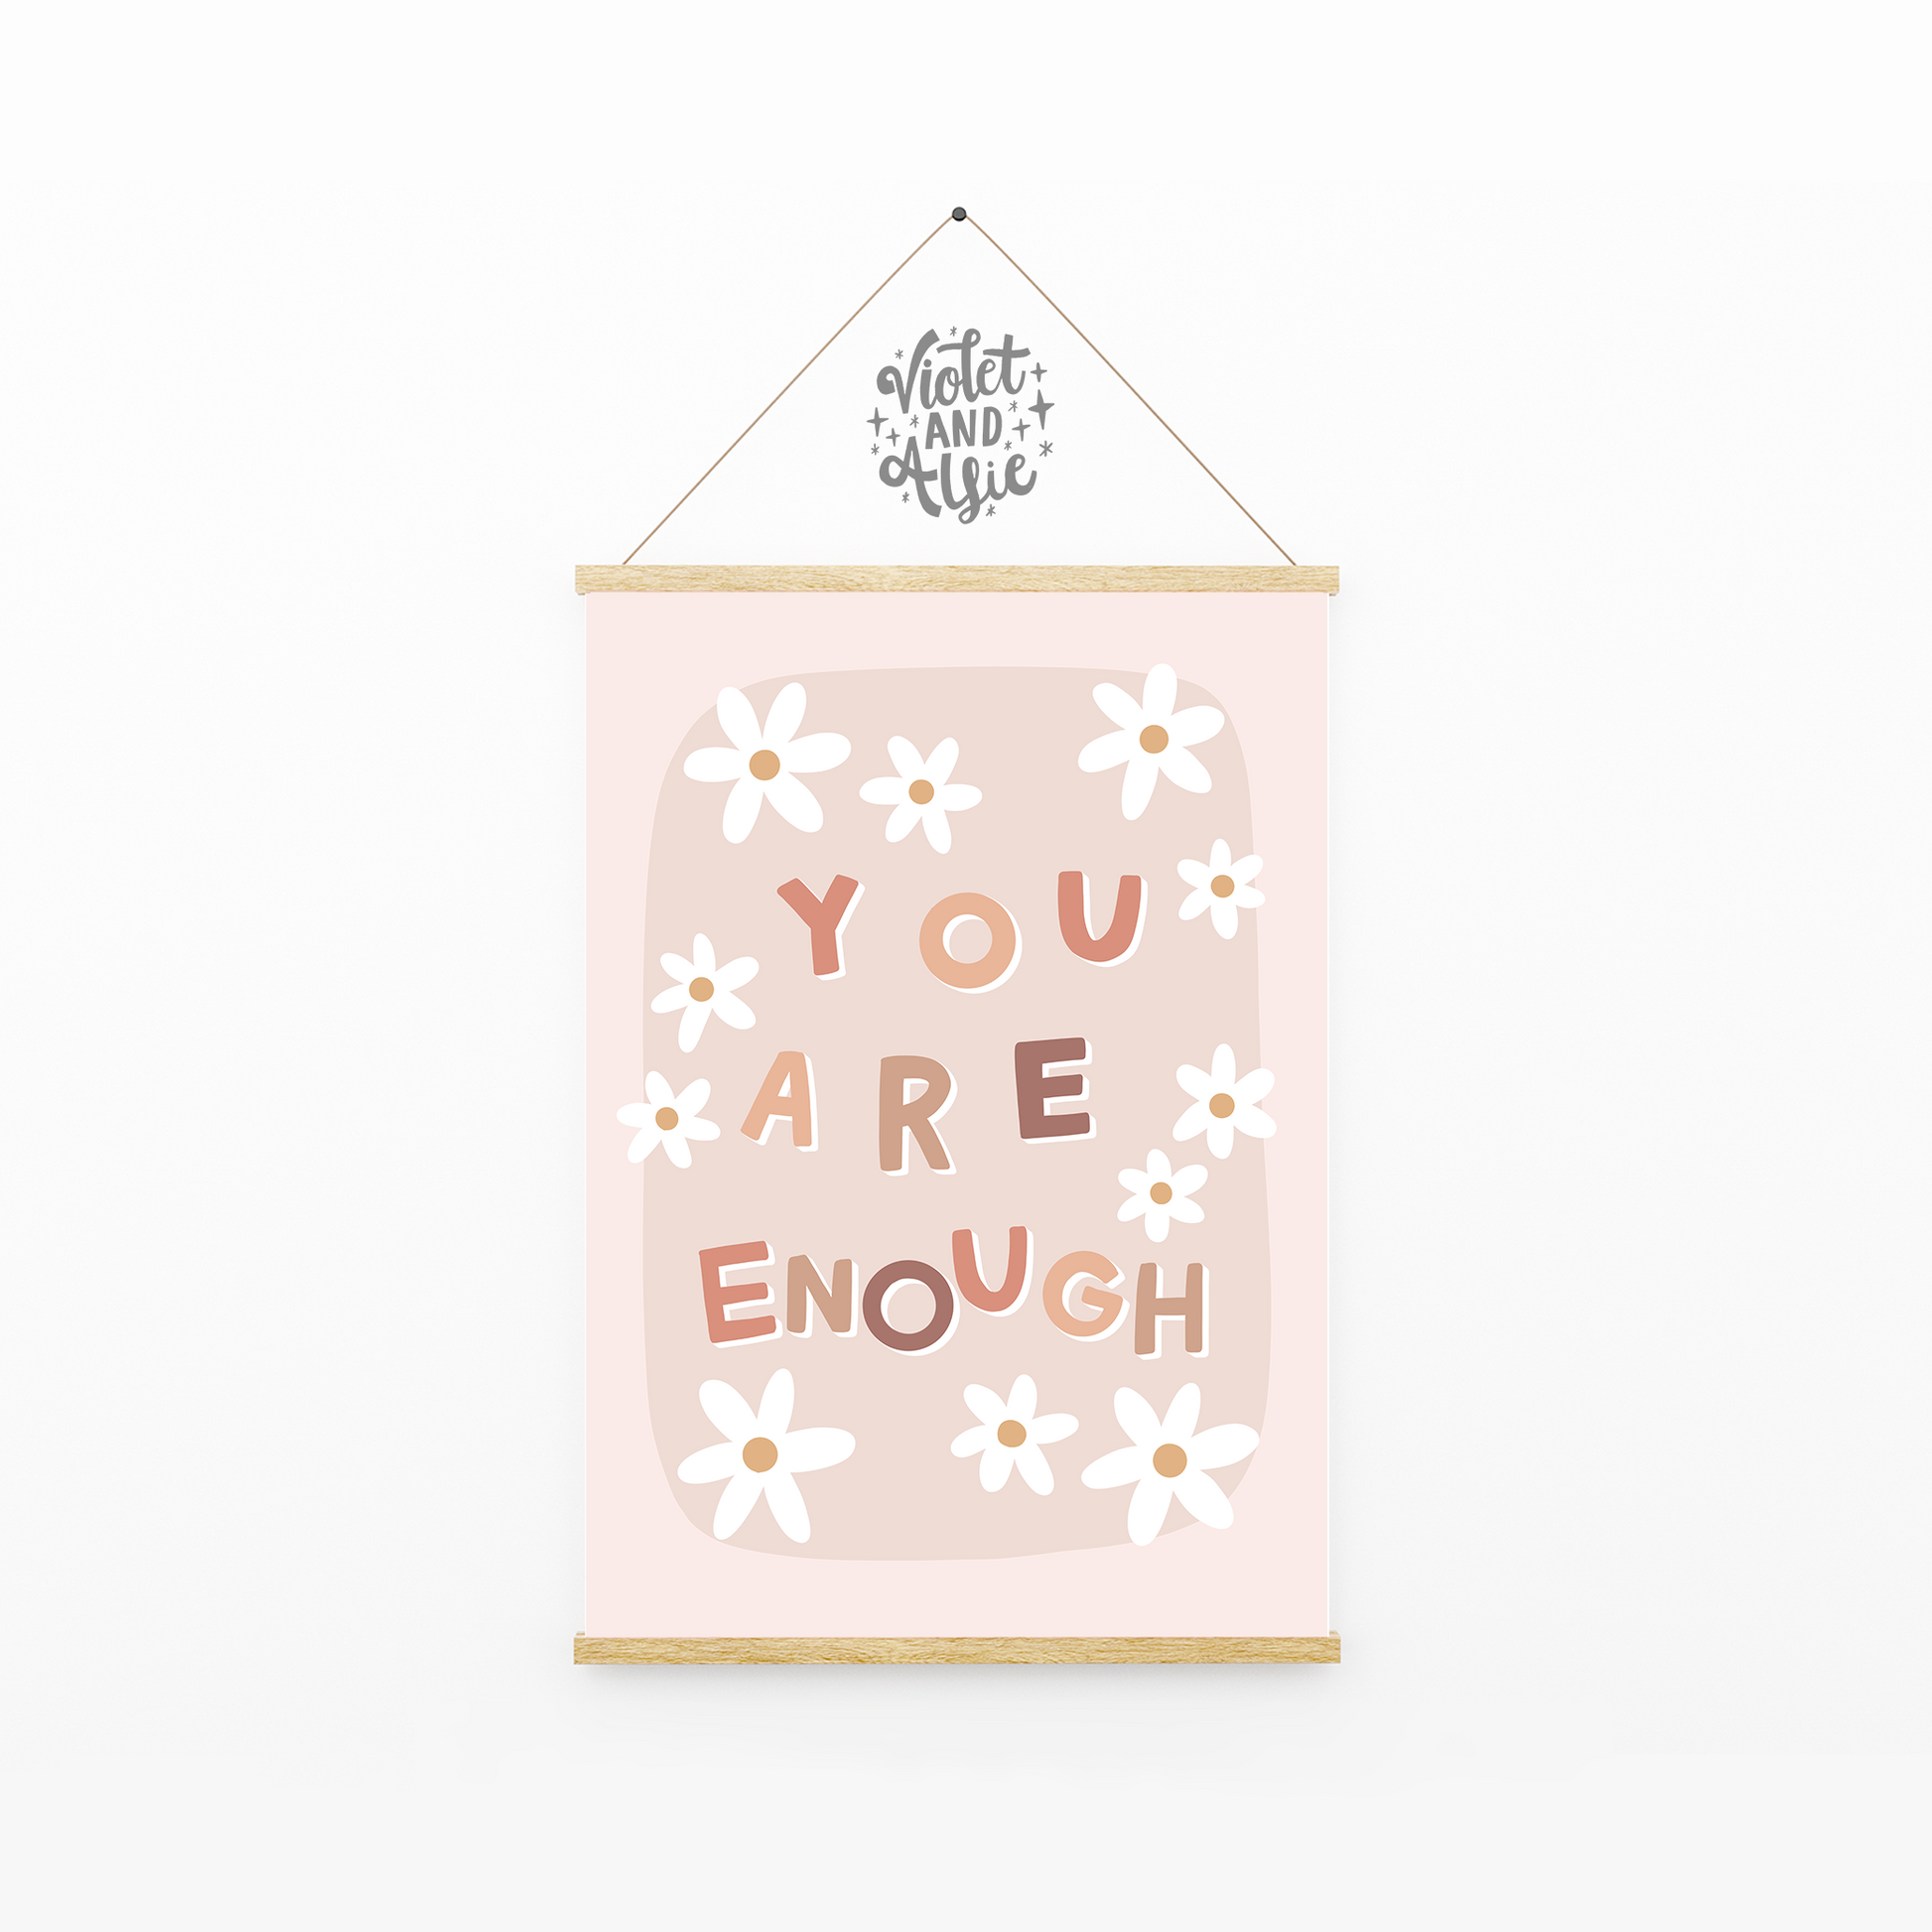 You Are Enough Print, Encouragement Gift, Blush Neutral Boho Decor, Prints For Women, Empowering Quote, Daisies print, You are enough